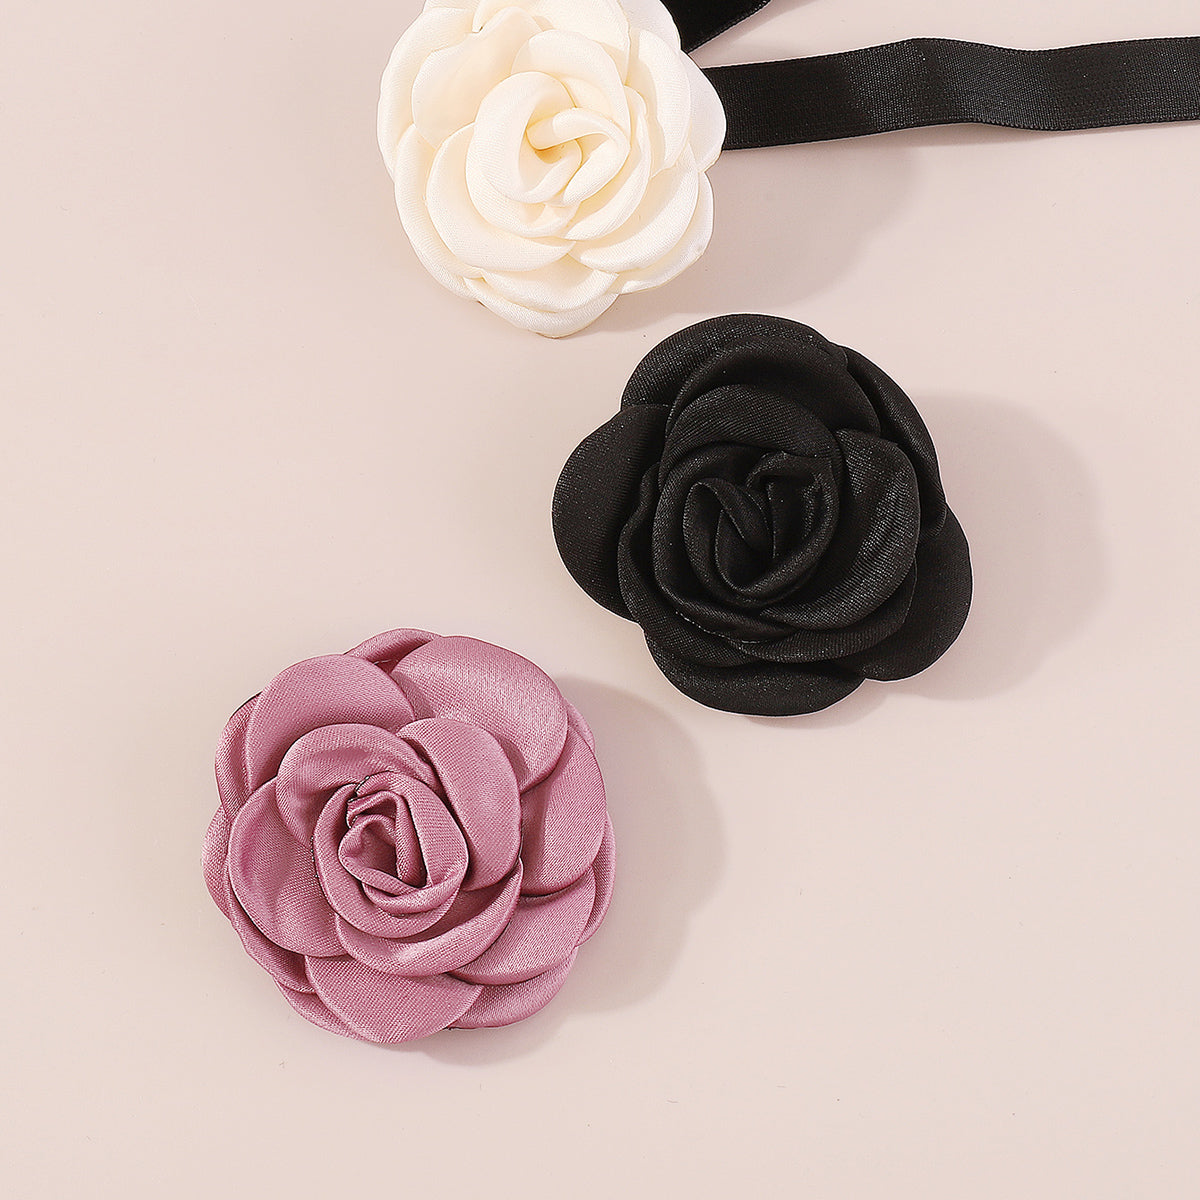 N11281 Mix and Match Roses Choker Necklace